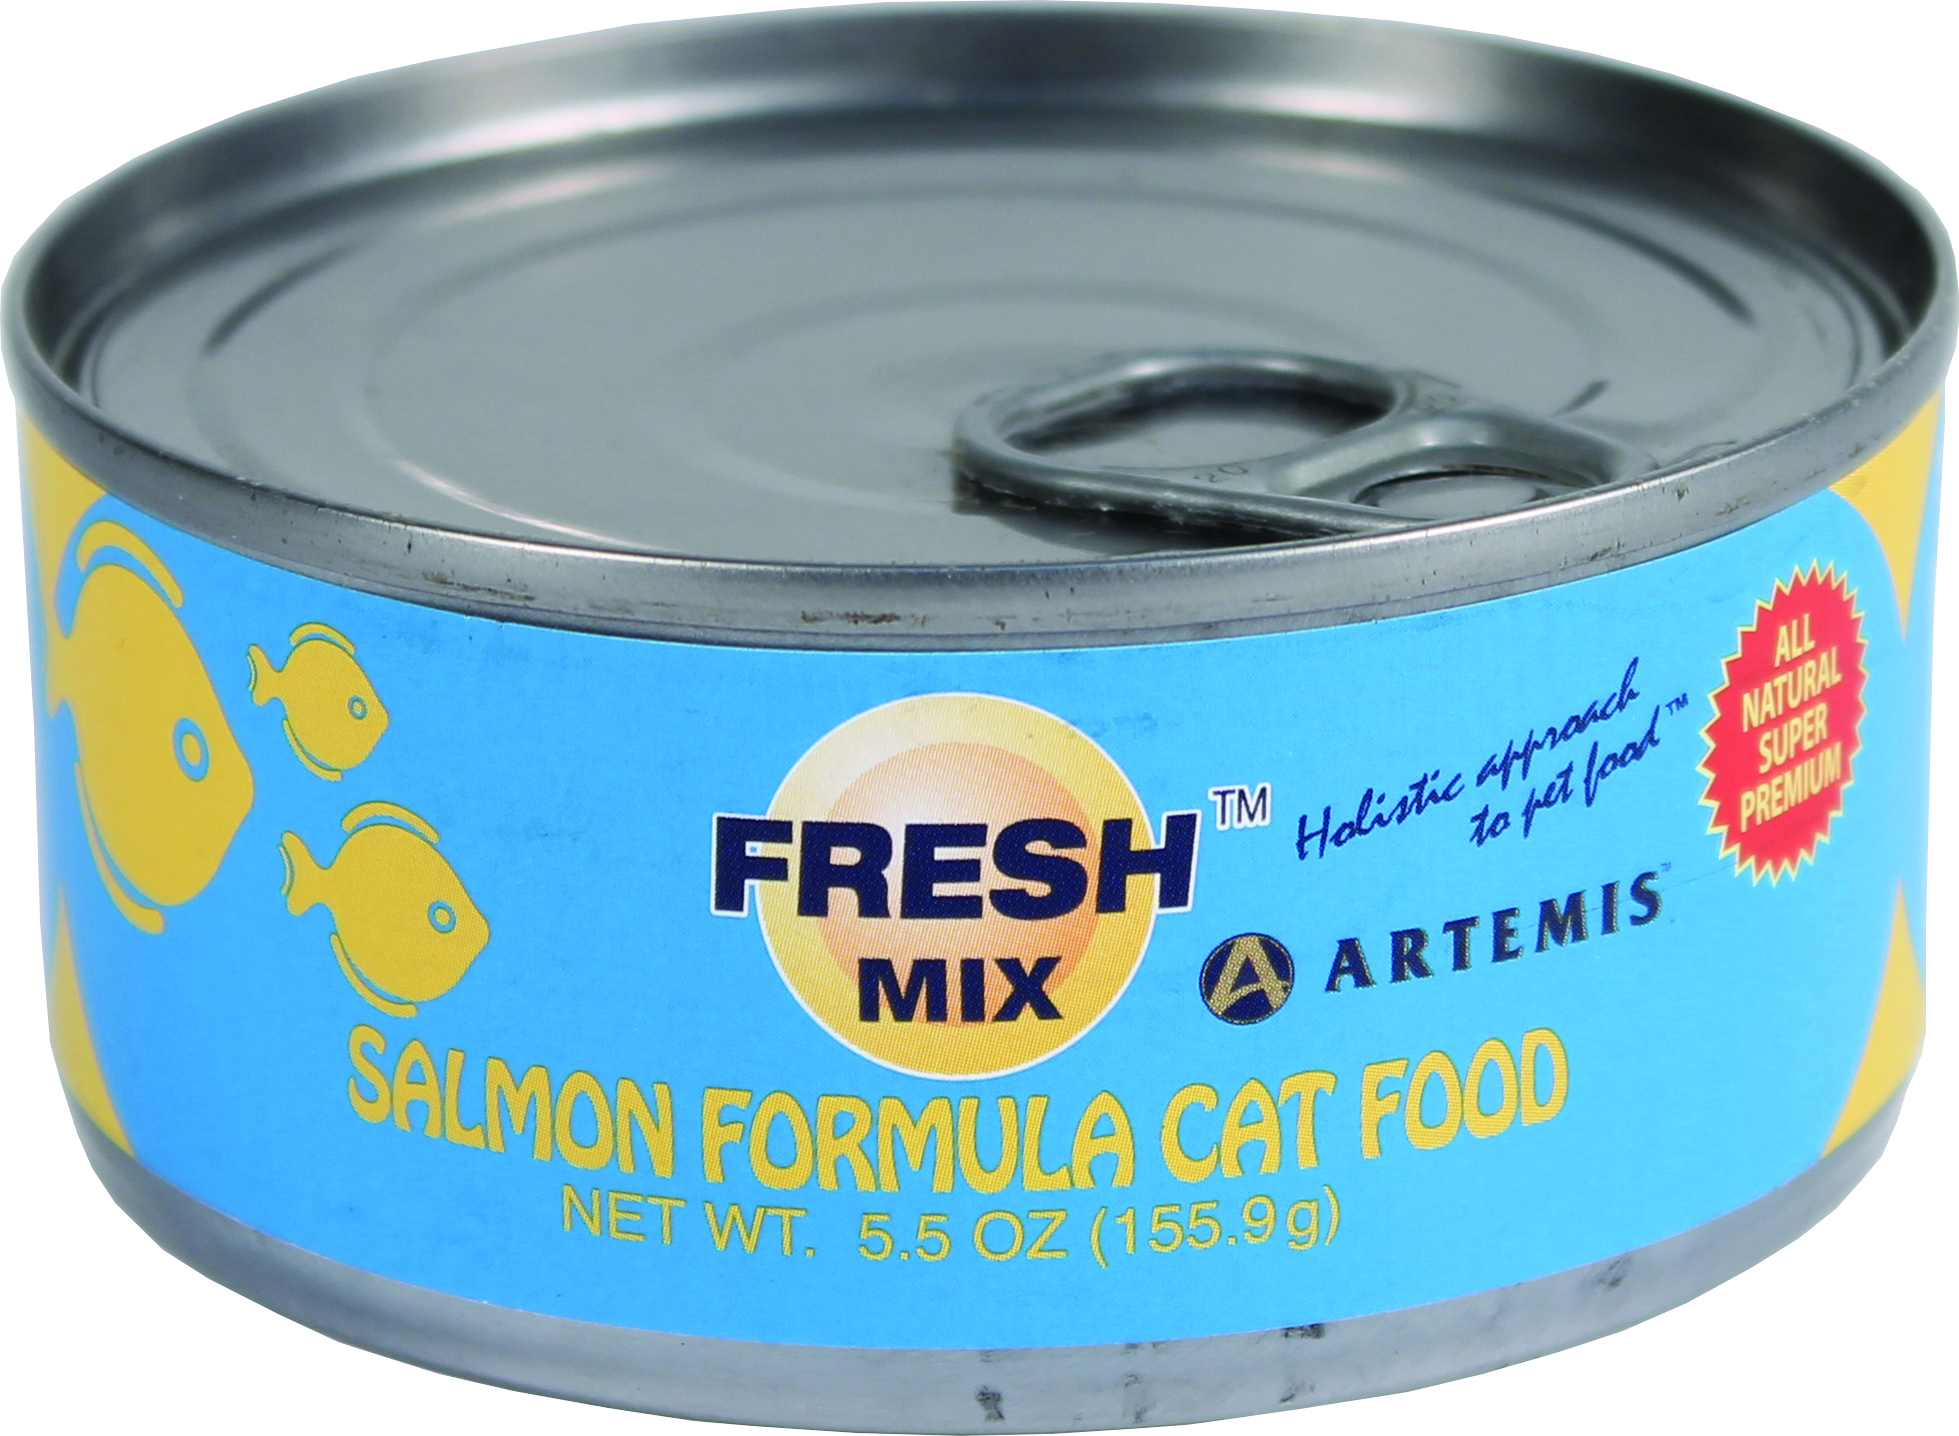 FRESH MIX CANNED CAT FOOD